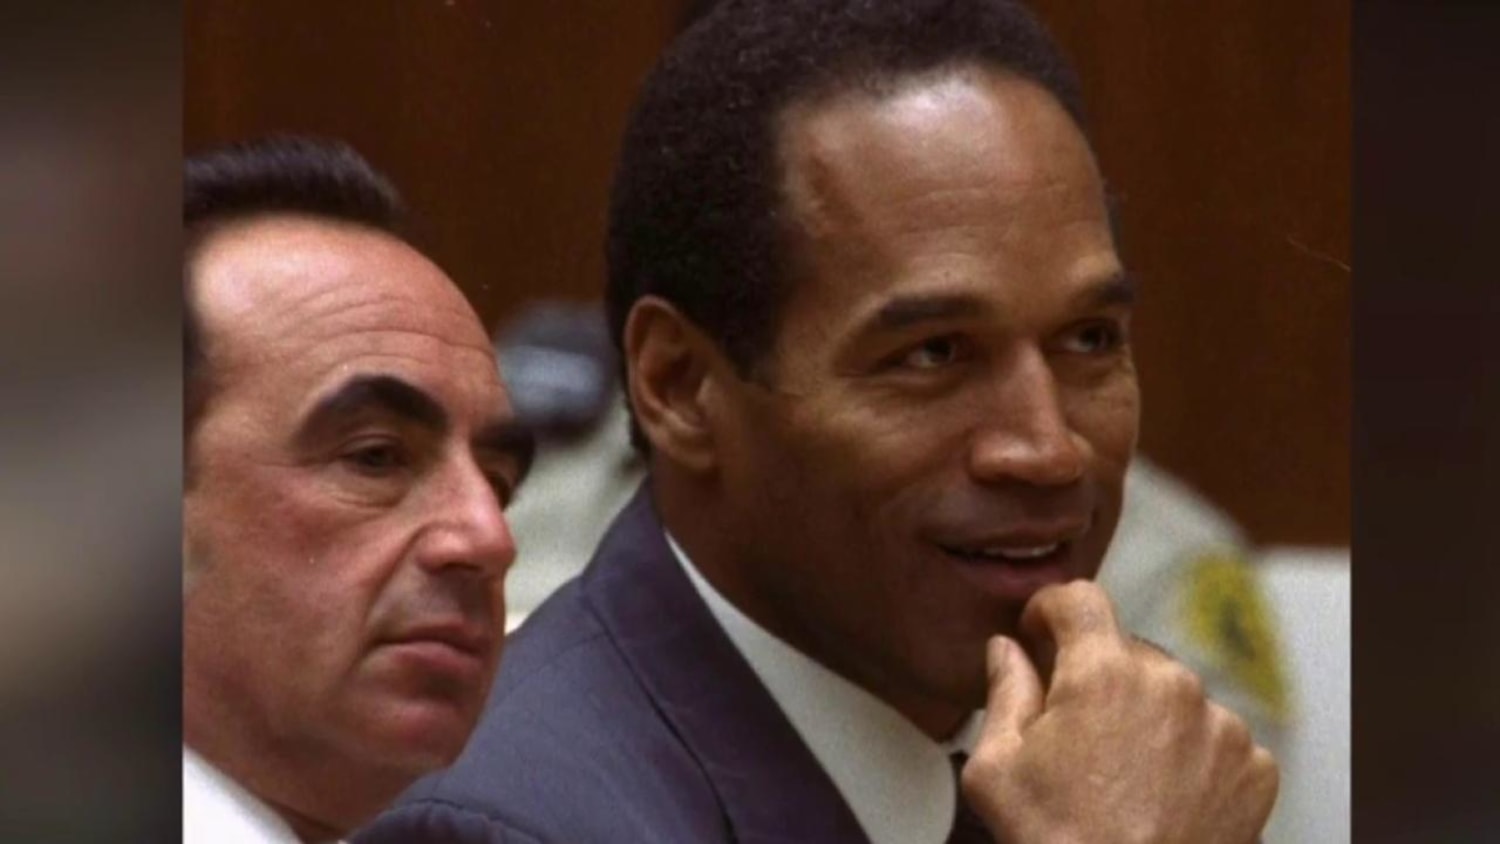 Robert Shapiro Admits Trying On Gloves In O J Simpson Trial